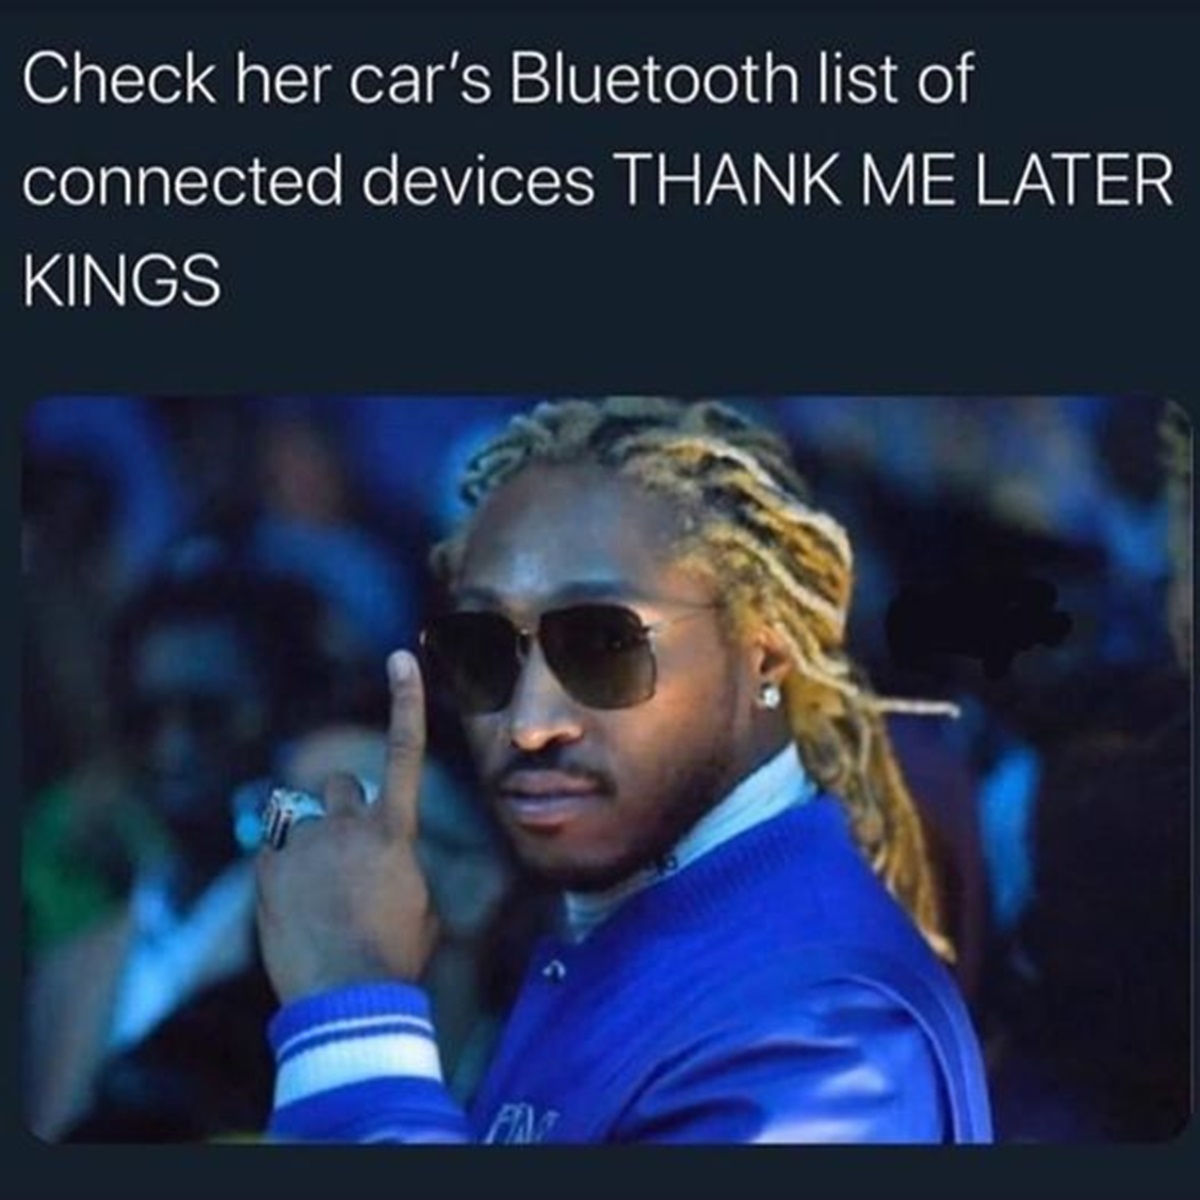 photo caption - Check her car's Bluetooth list of connected devices Thank Me Later Kings Fin